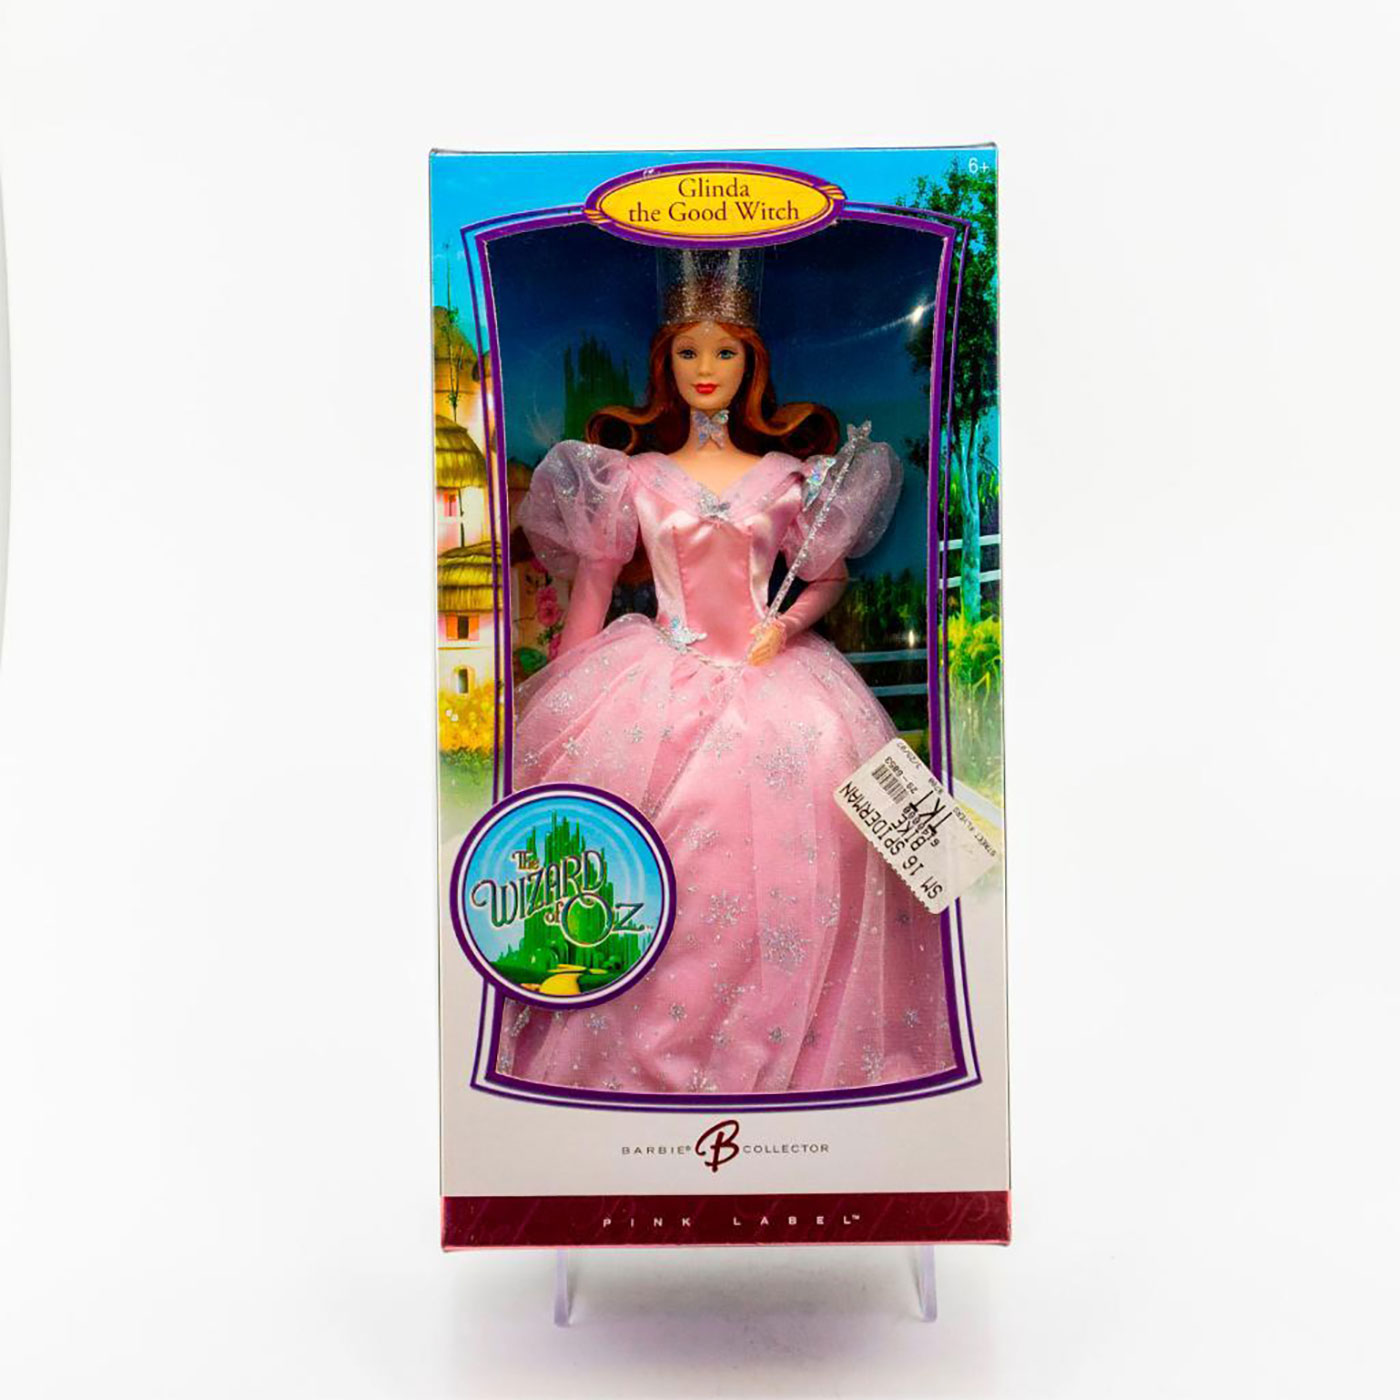 Mattel Wizard Of Oz Barbie Doll, Glinda, The Good Witch | Lion and